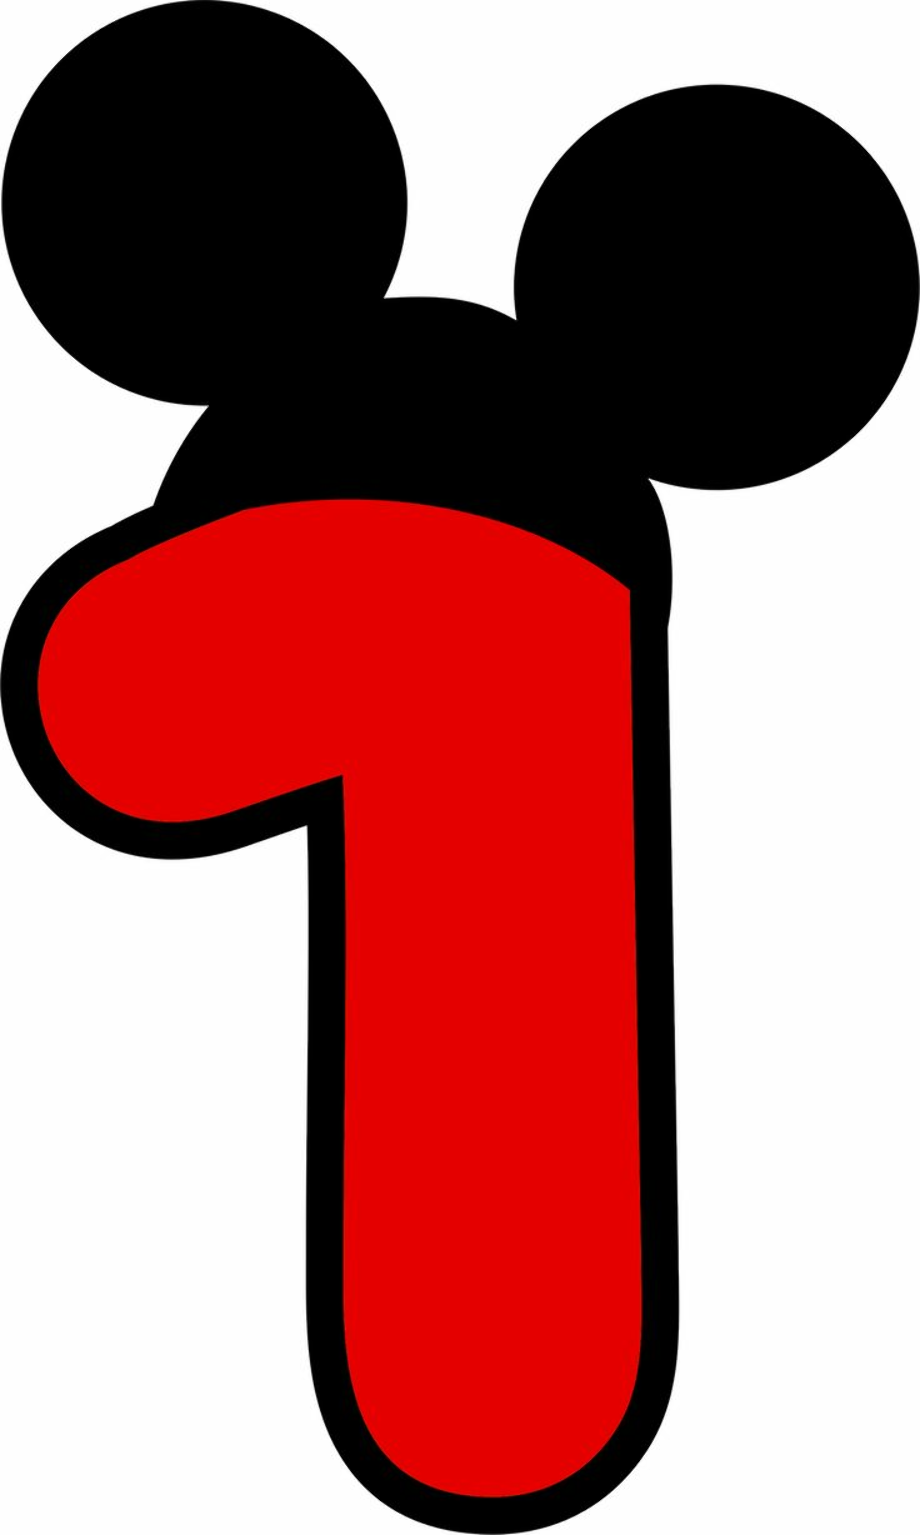 Download High Quality mickey mouse clipart one Transparent PNG Images